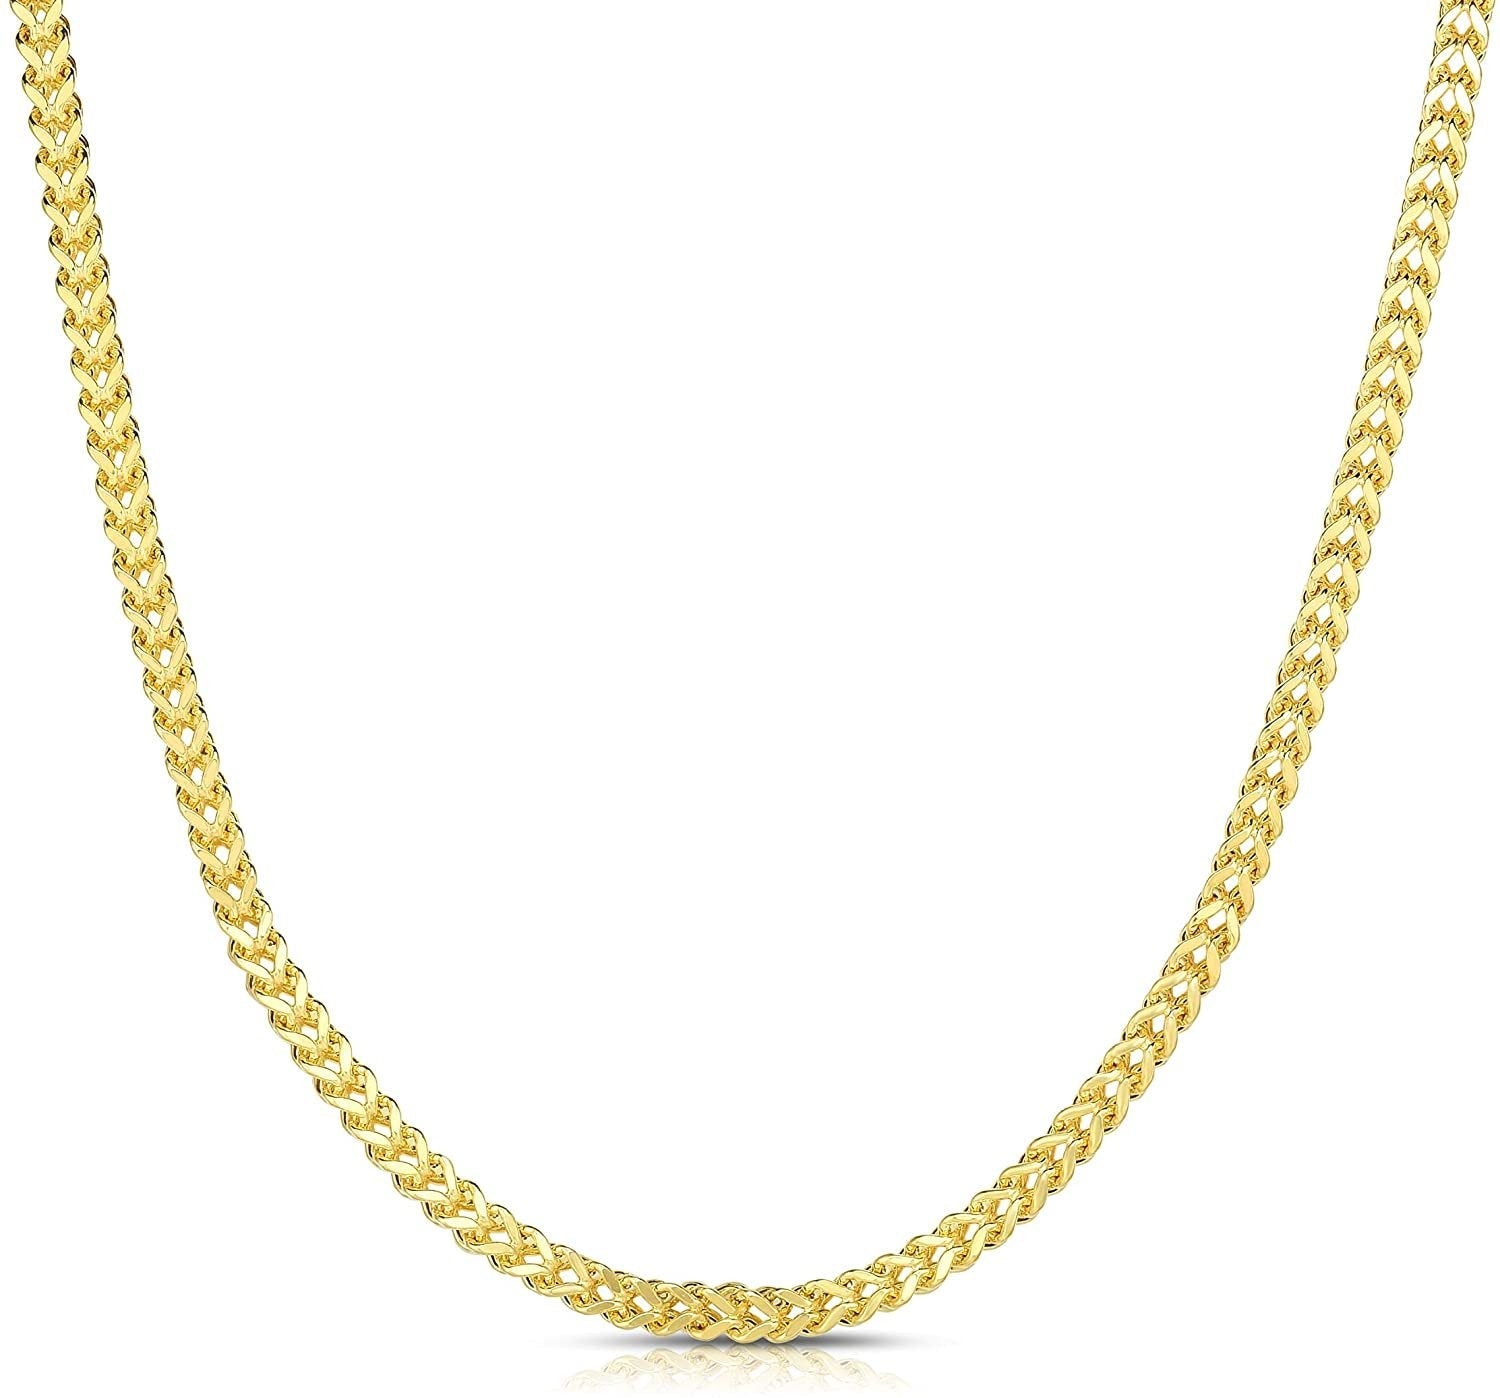 Floreo 10k Yellow Gold 5.6mm Lightweight Franco Chain Necklace